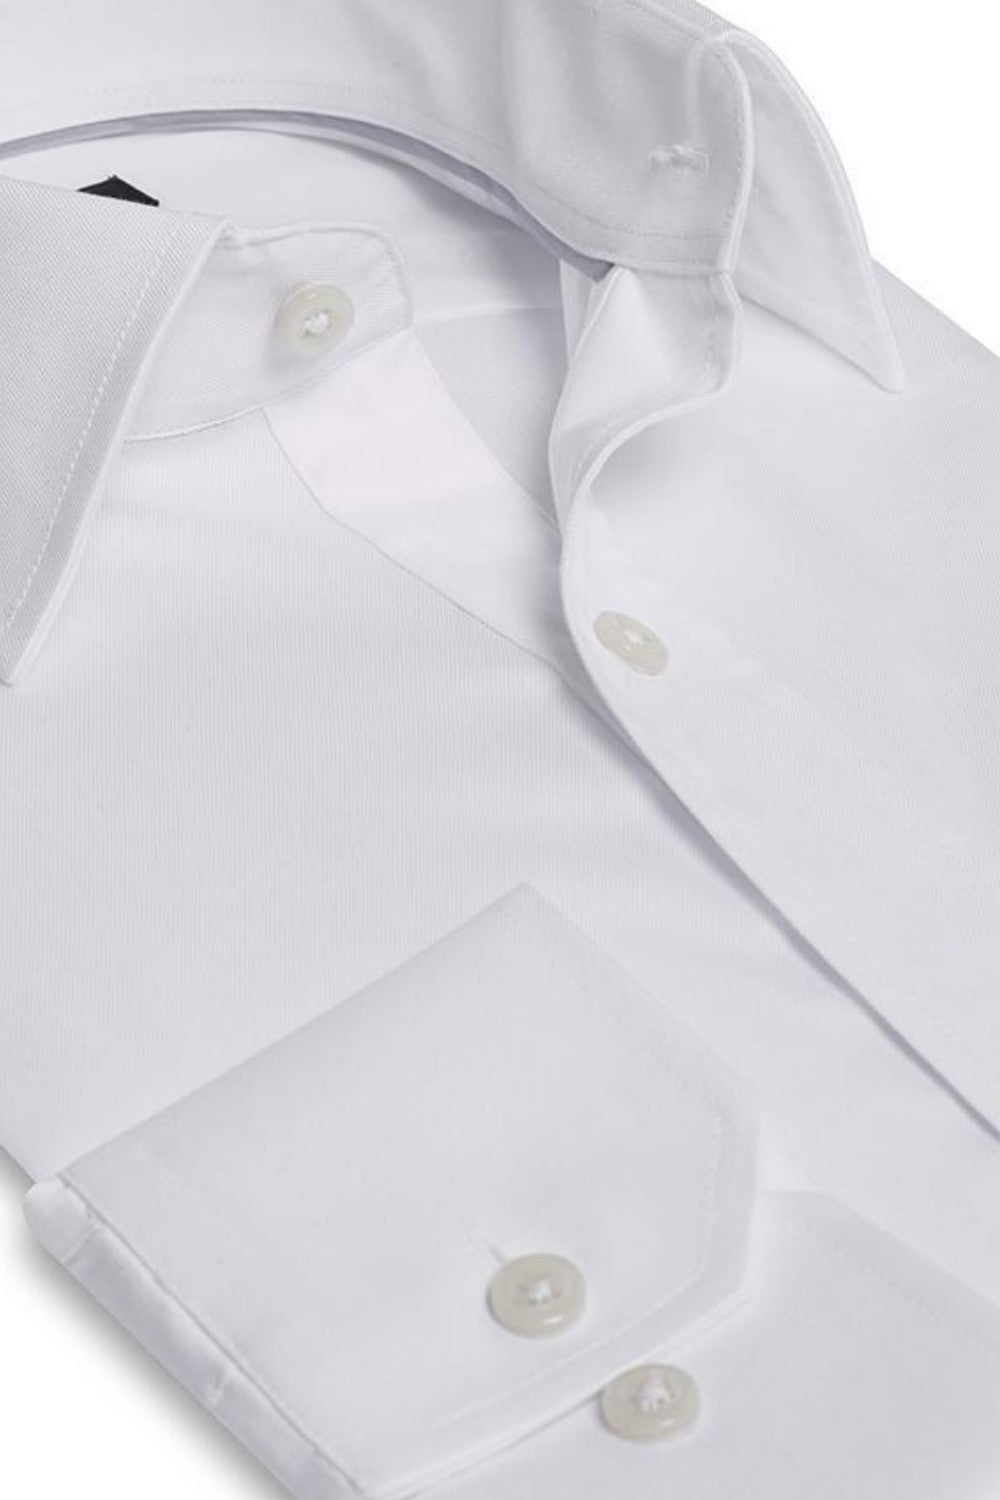 EVANS WHITE BUTTON DOWN DRESS SHIRT - CASUAL /FORMAL EVENT - SIDE VIEW